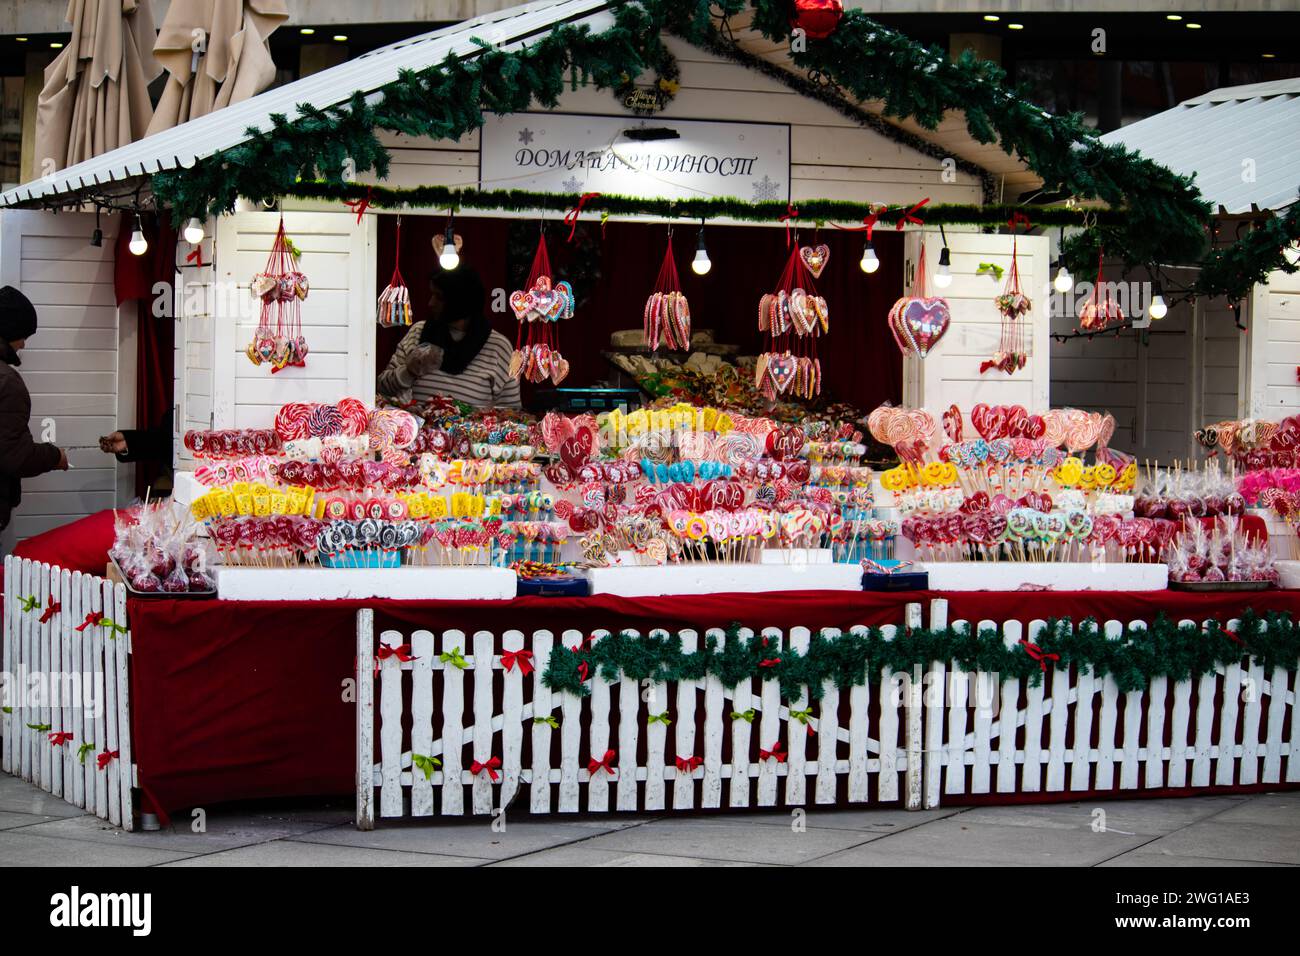 Colorful and attractive street candy shop full of sweets, lollipops, cakes, gummies, during winter holidays, New Year and Christmas season Stock Photo